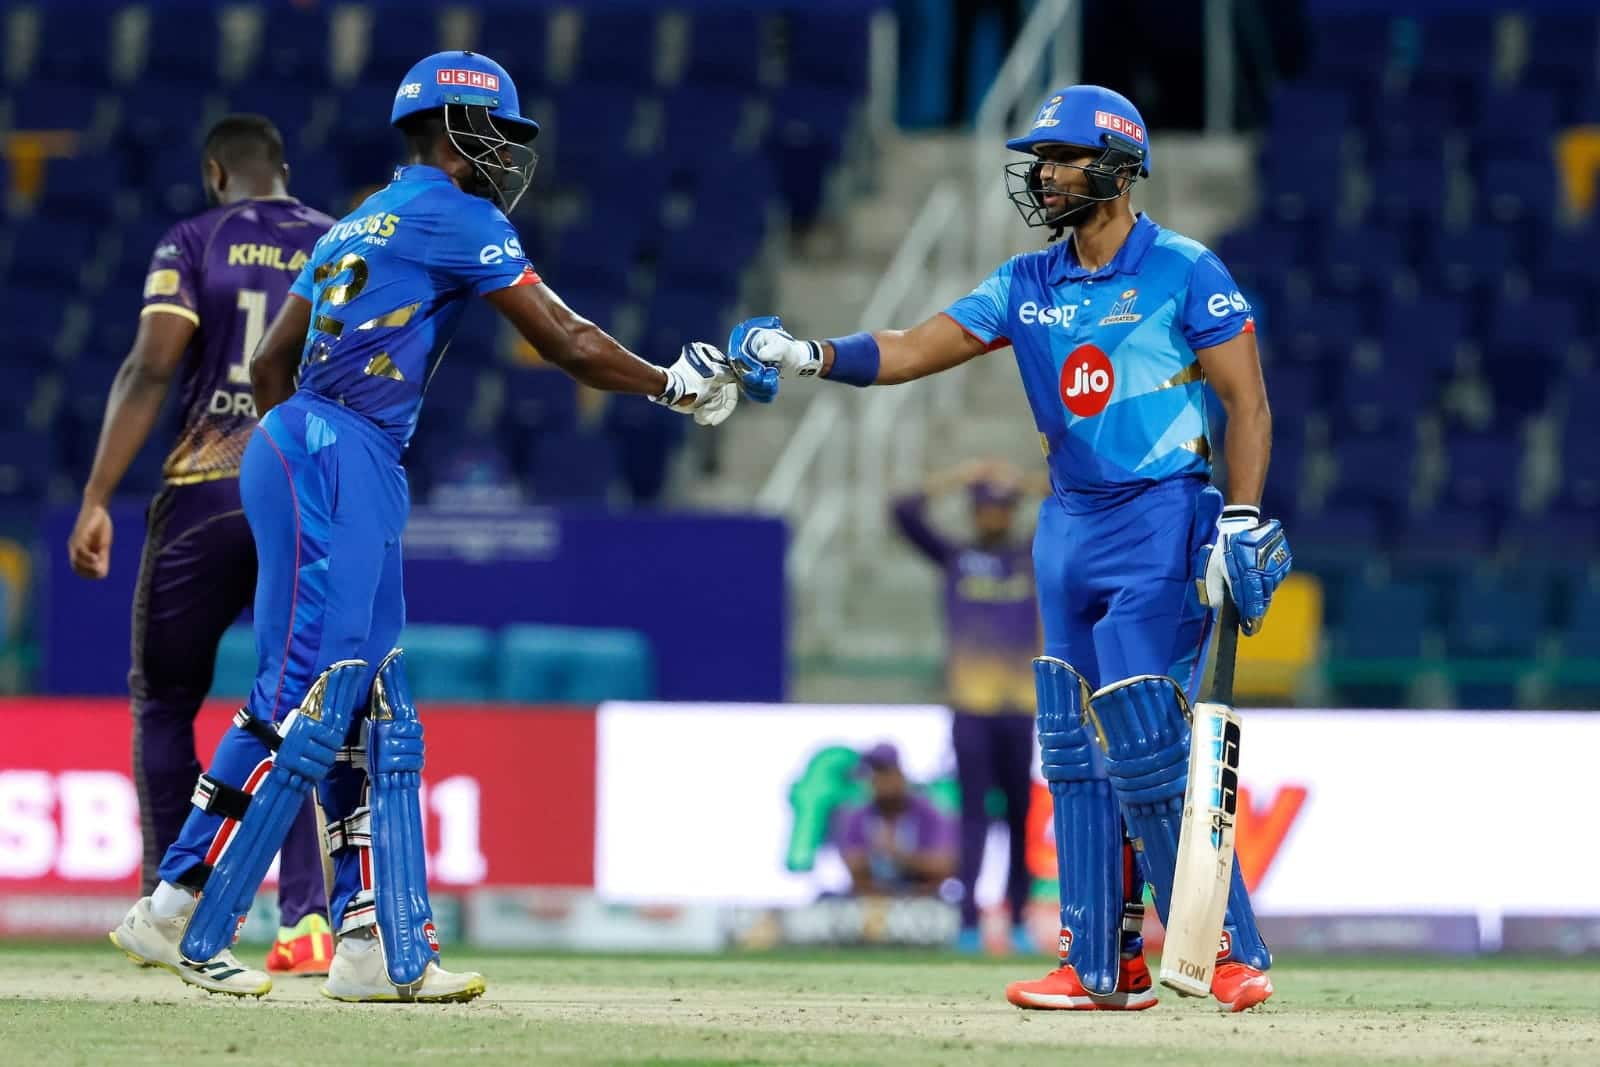 Clinical MI Emirates cruise past Abu Dhabi Knight Riders in a thriller